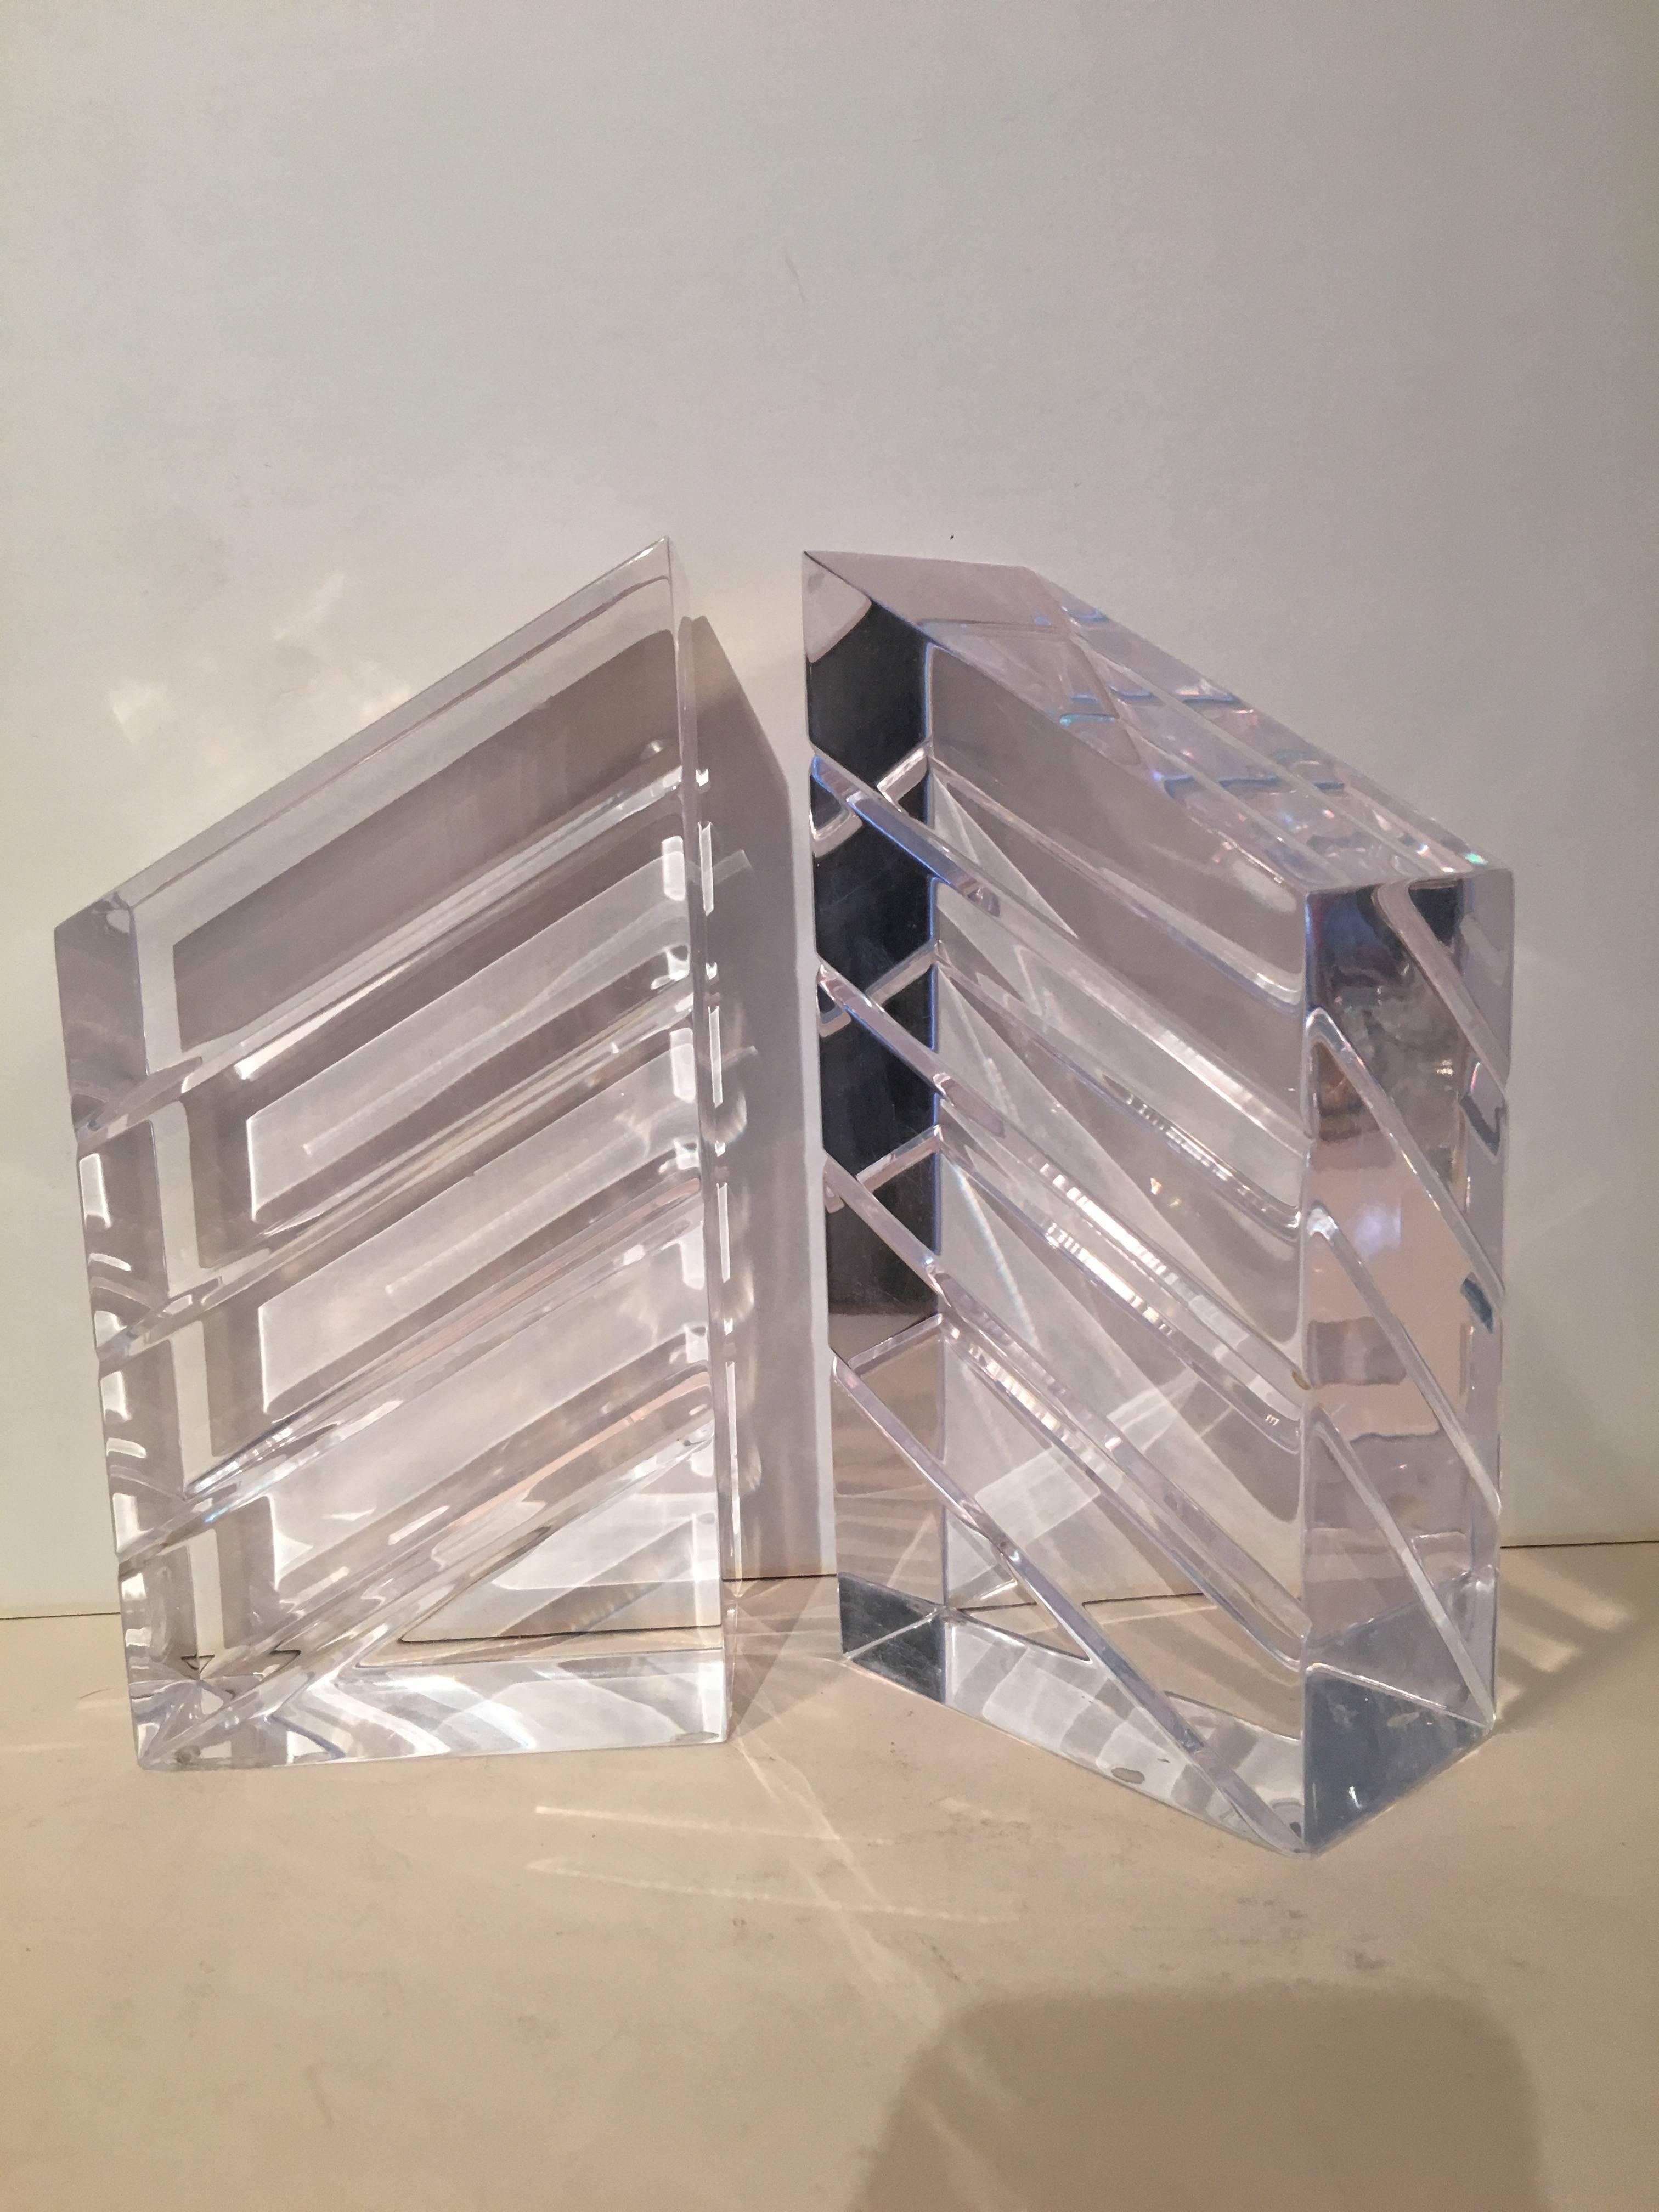 Pair of Lucite / Acrylic bookends by Ritts and Co. - super sleek and perfect for any space. Especially good for the modern or minimalist space. The pair are very architectural and in perfect condition.